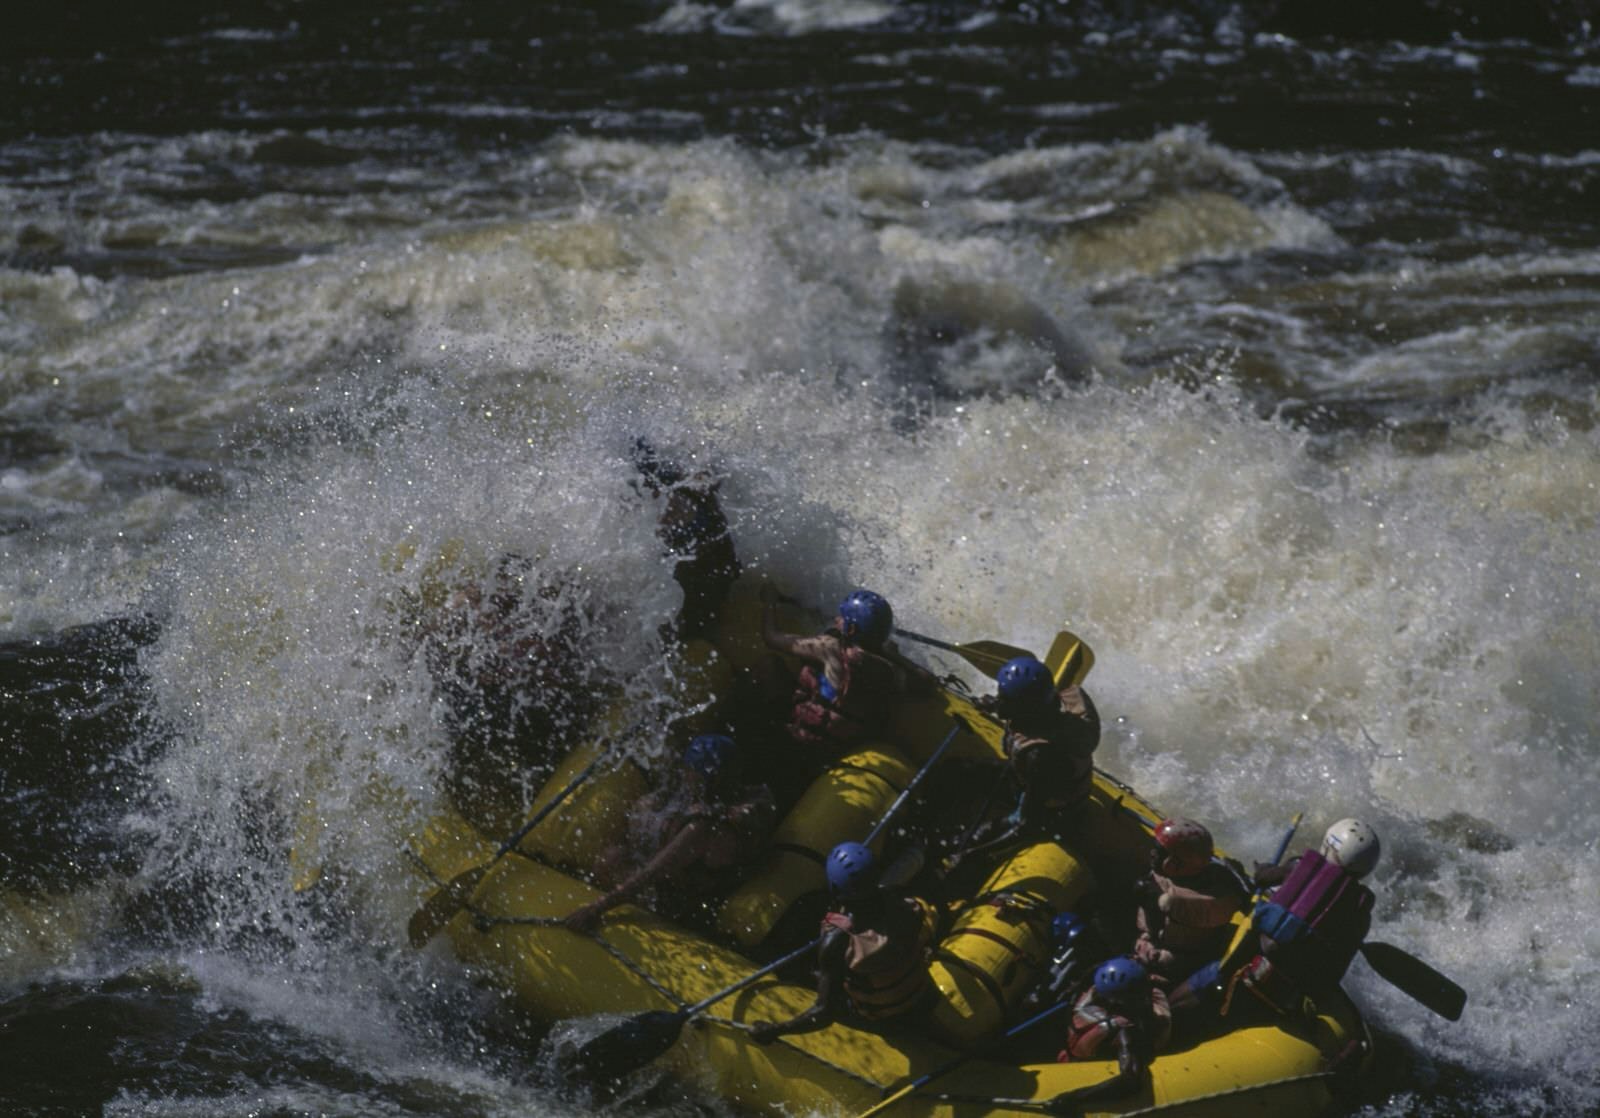 A river raft is deluged and almost turned over by an intense set of rapids on the Zambezi; most of the rafters have one hand on a paddle and the other firmly on the raft's safety line.